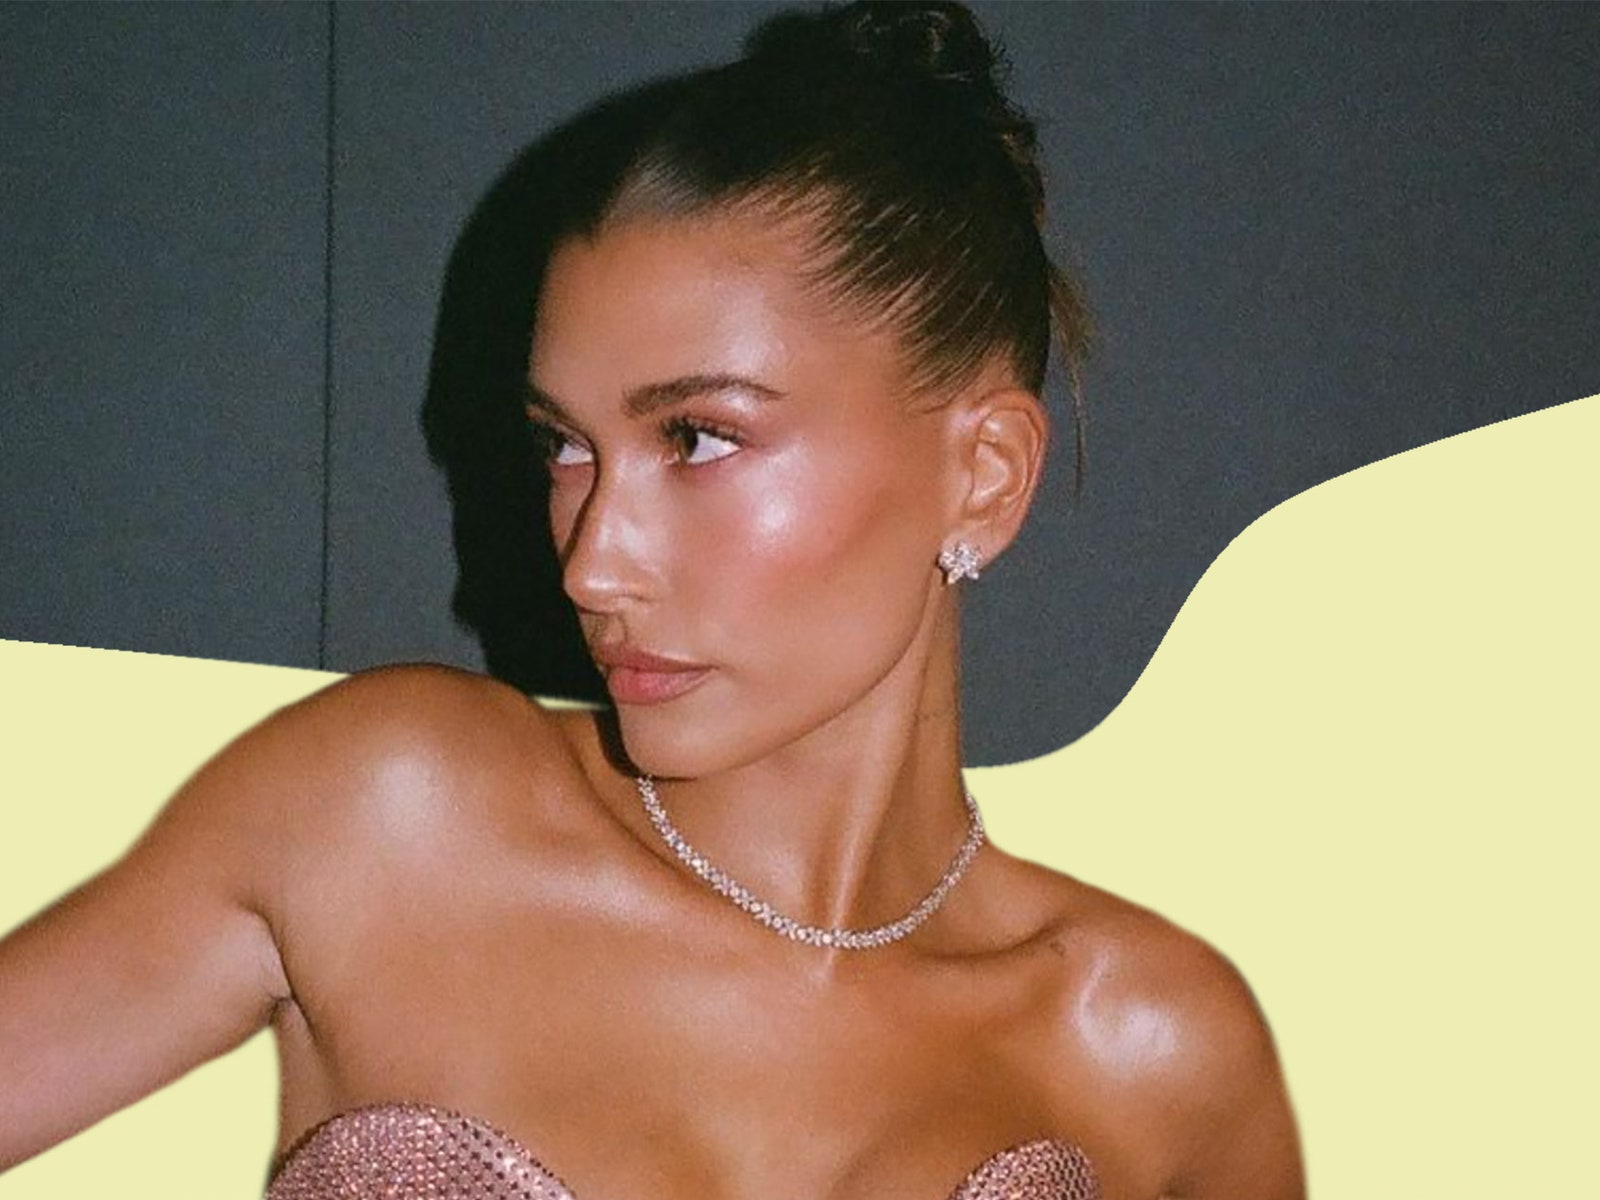 Hailey Bieber's milky black nails are the perfect anti-glazed donut manicure for summer